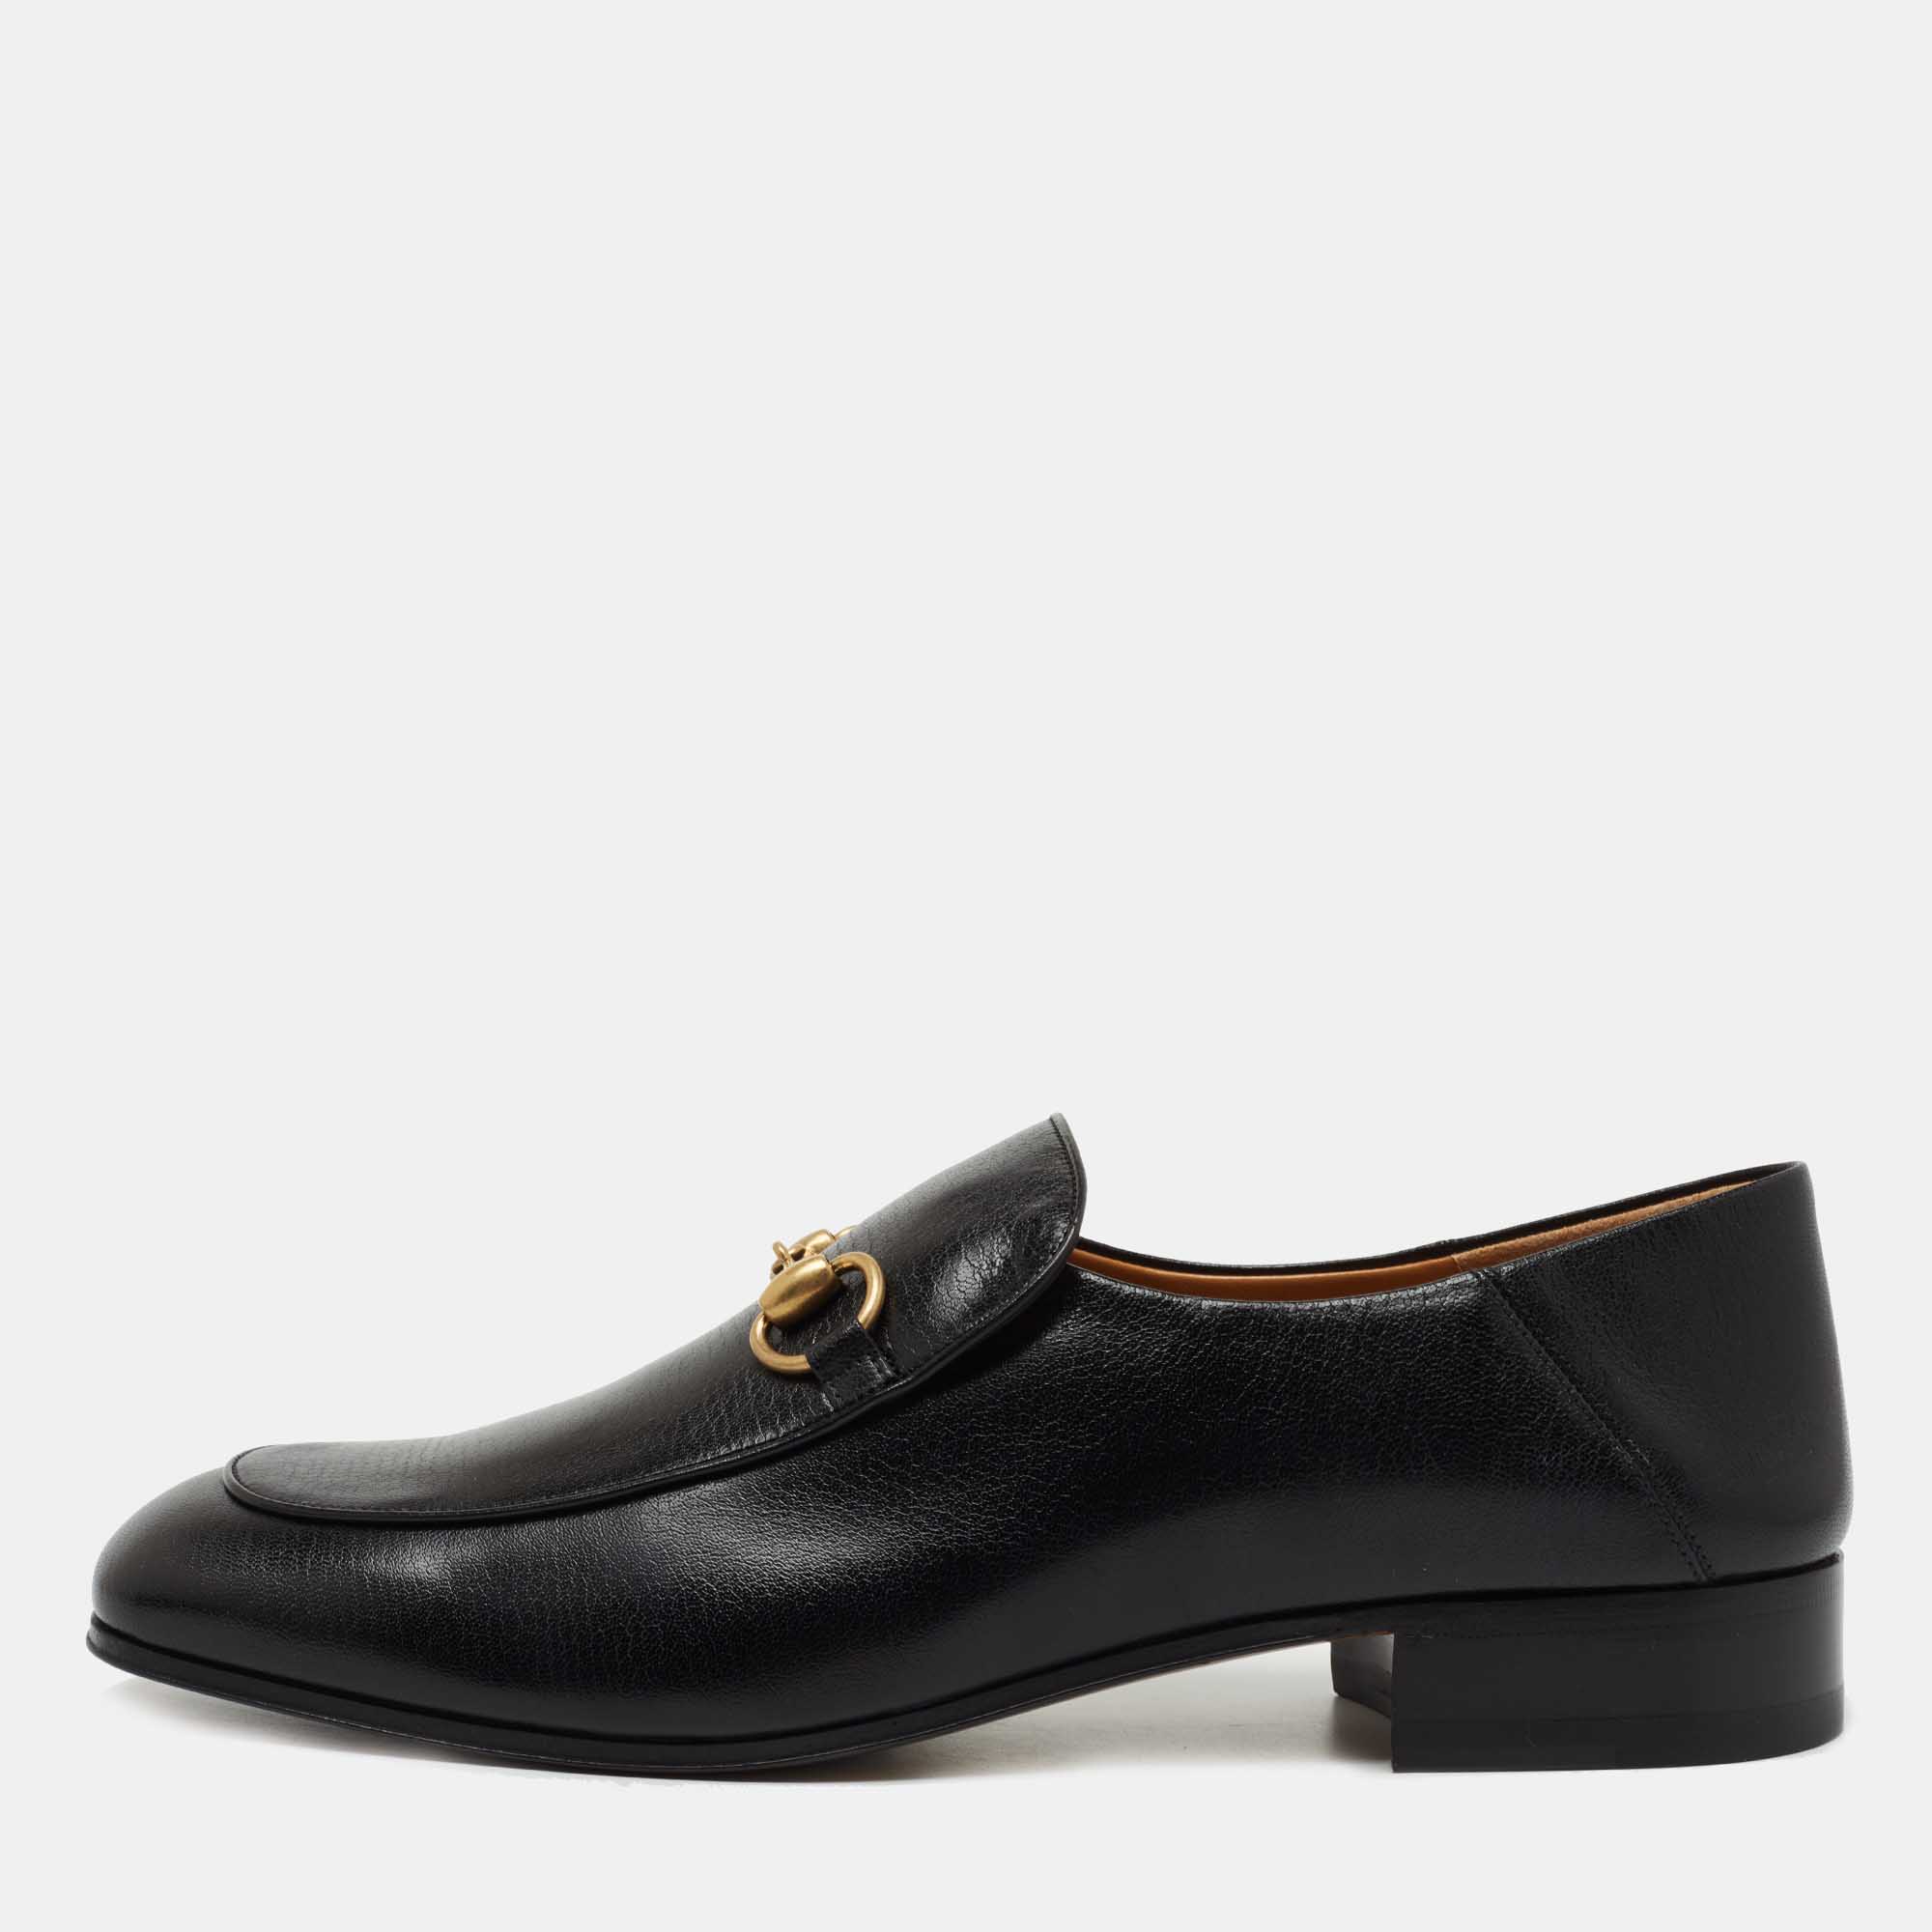 Pre-owned Gucci Black Leather Jordaan Horsebit Slip On Loafers Size 43